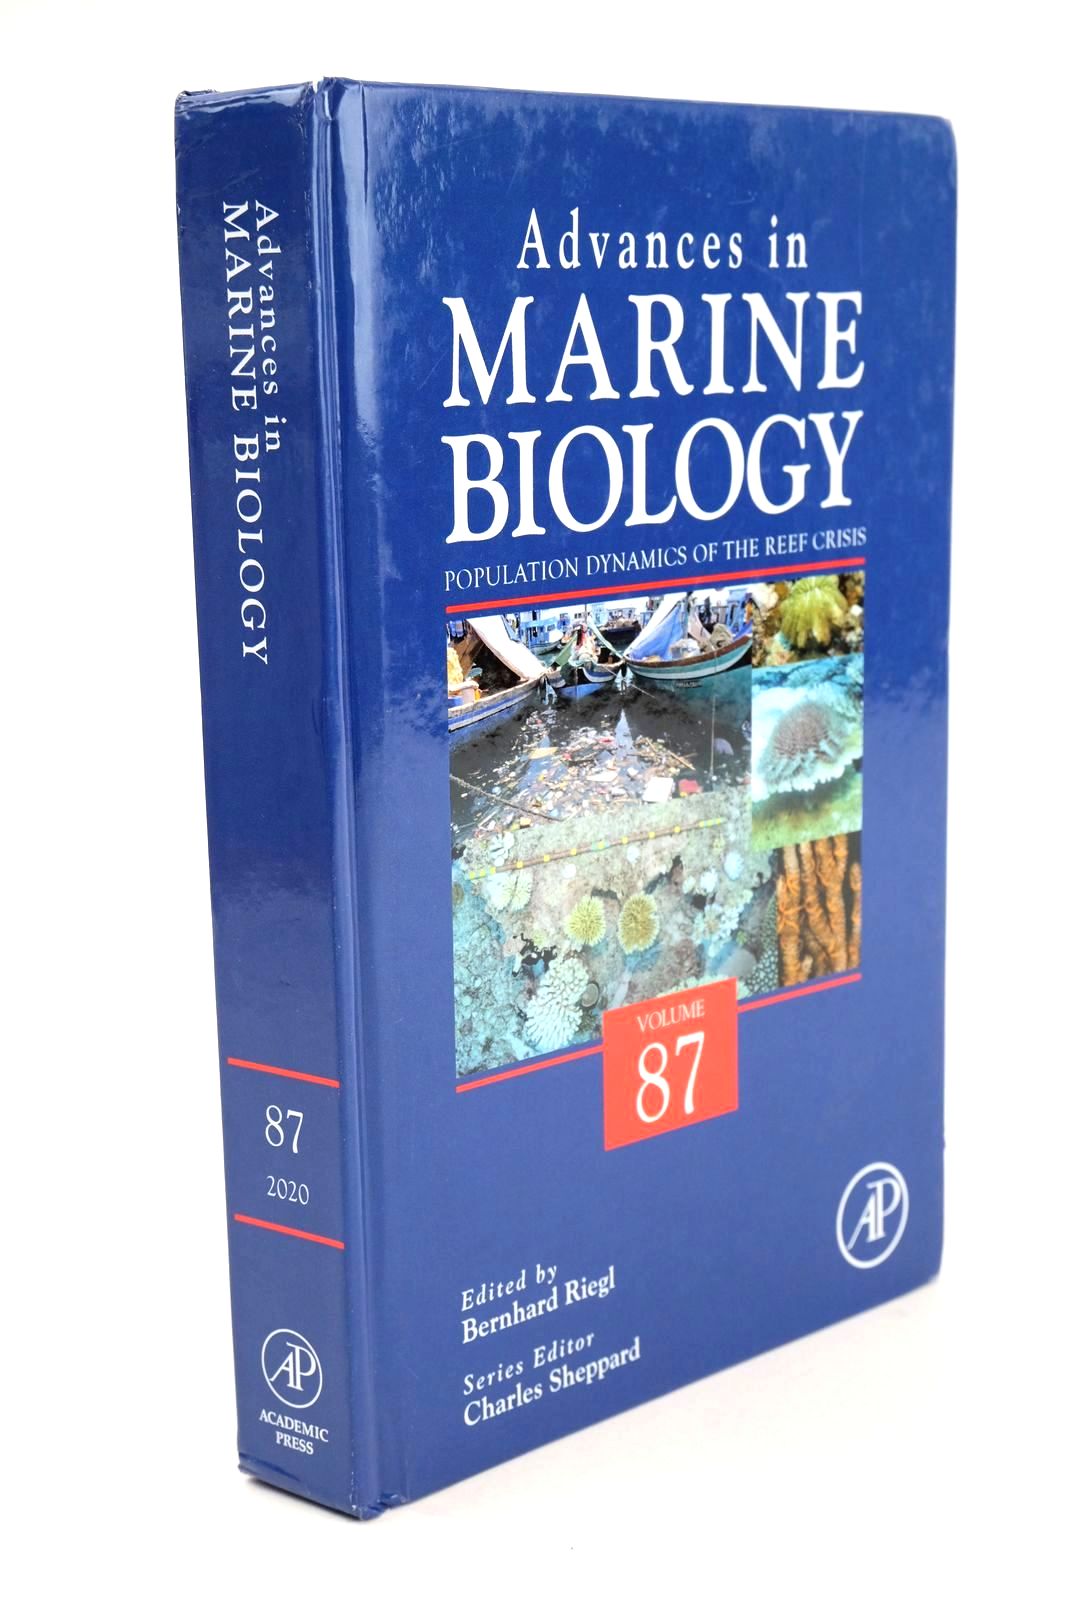 Photo of ADVANCES IN MARINE BIOLOGY POPULATION DYNAMICS OF THE REEF CRISIS written by Riegl, Bernhard M. published by Academic Press (STOCK CODE: 1324142)  for sale by Stella & Rose's Books